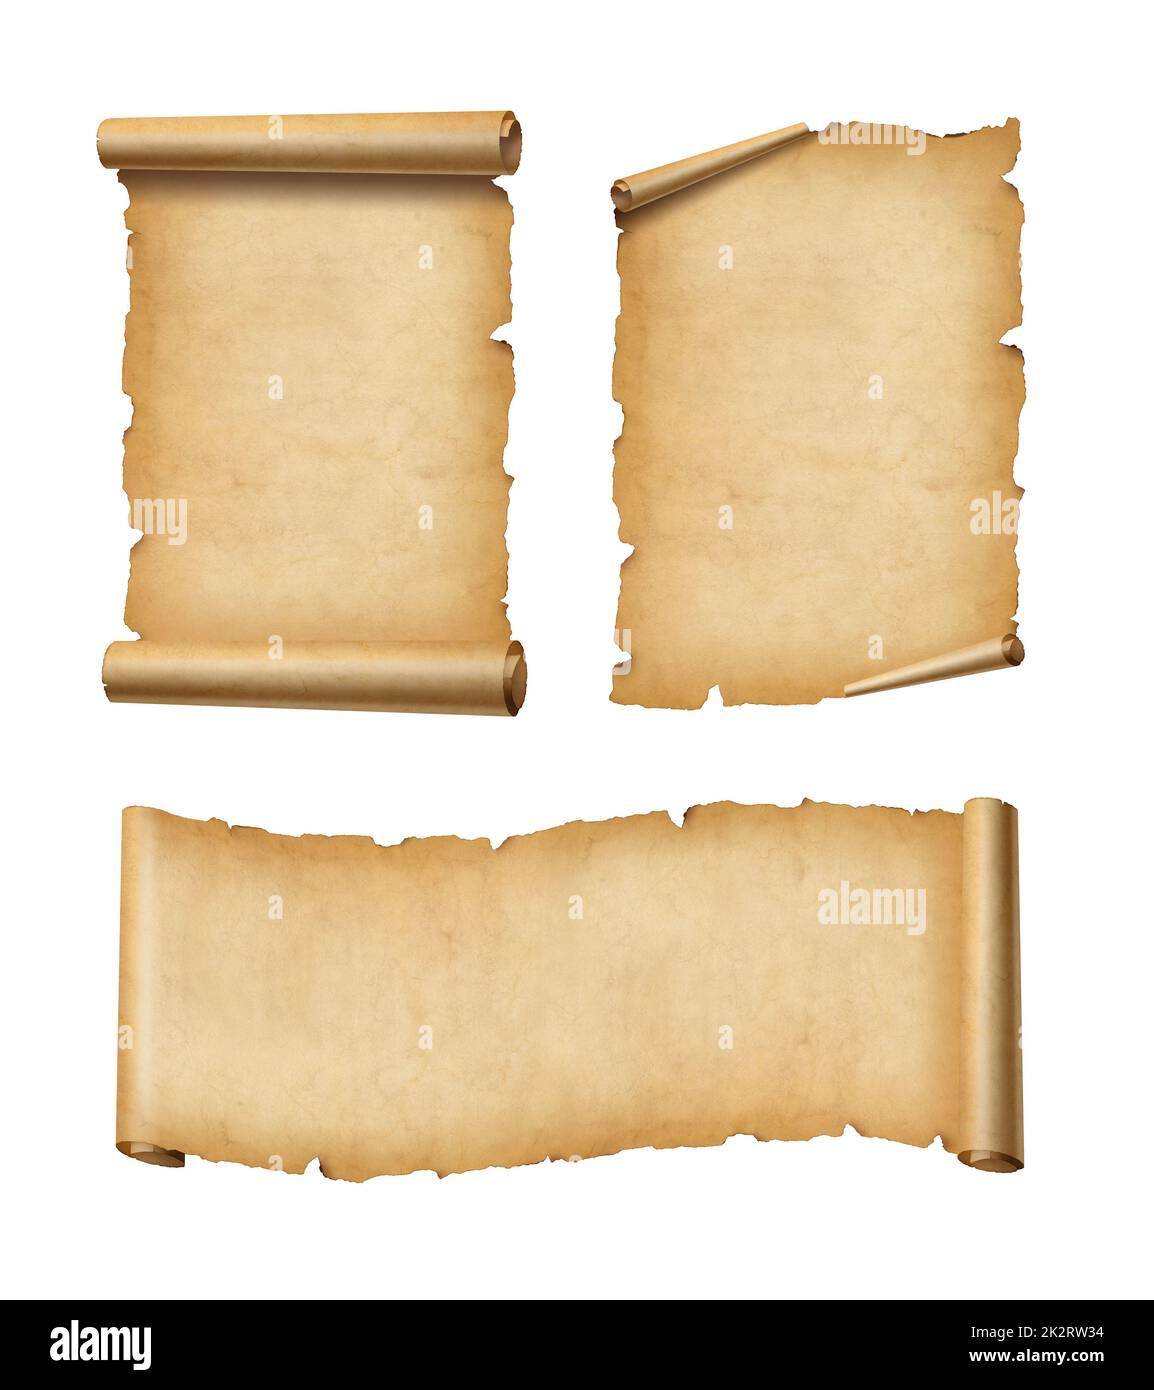 https://c8.alamy.com/comp/2K2RW34/old-parchment-paper-scroll-set-isolated-on-white-horizontal-and-vertical-banners-2K2RW34.jpg